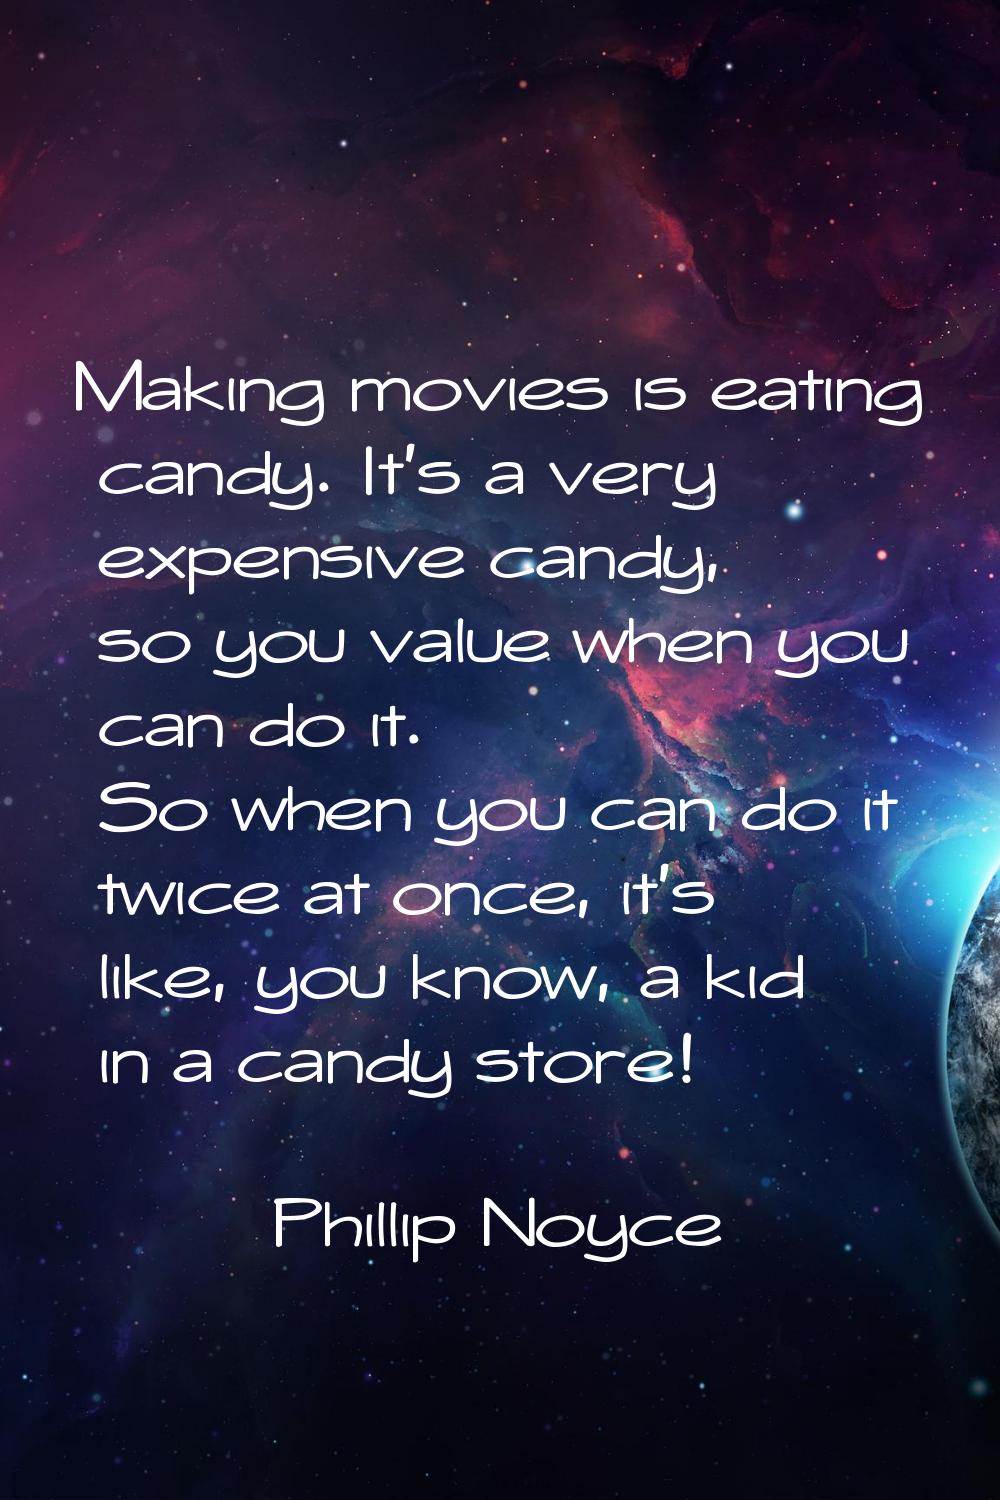 Making movies is eating candy. It's a very expensive candy, so you value when you can do it. So whe